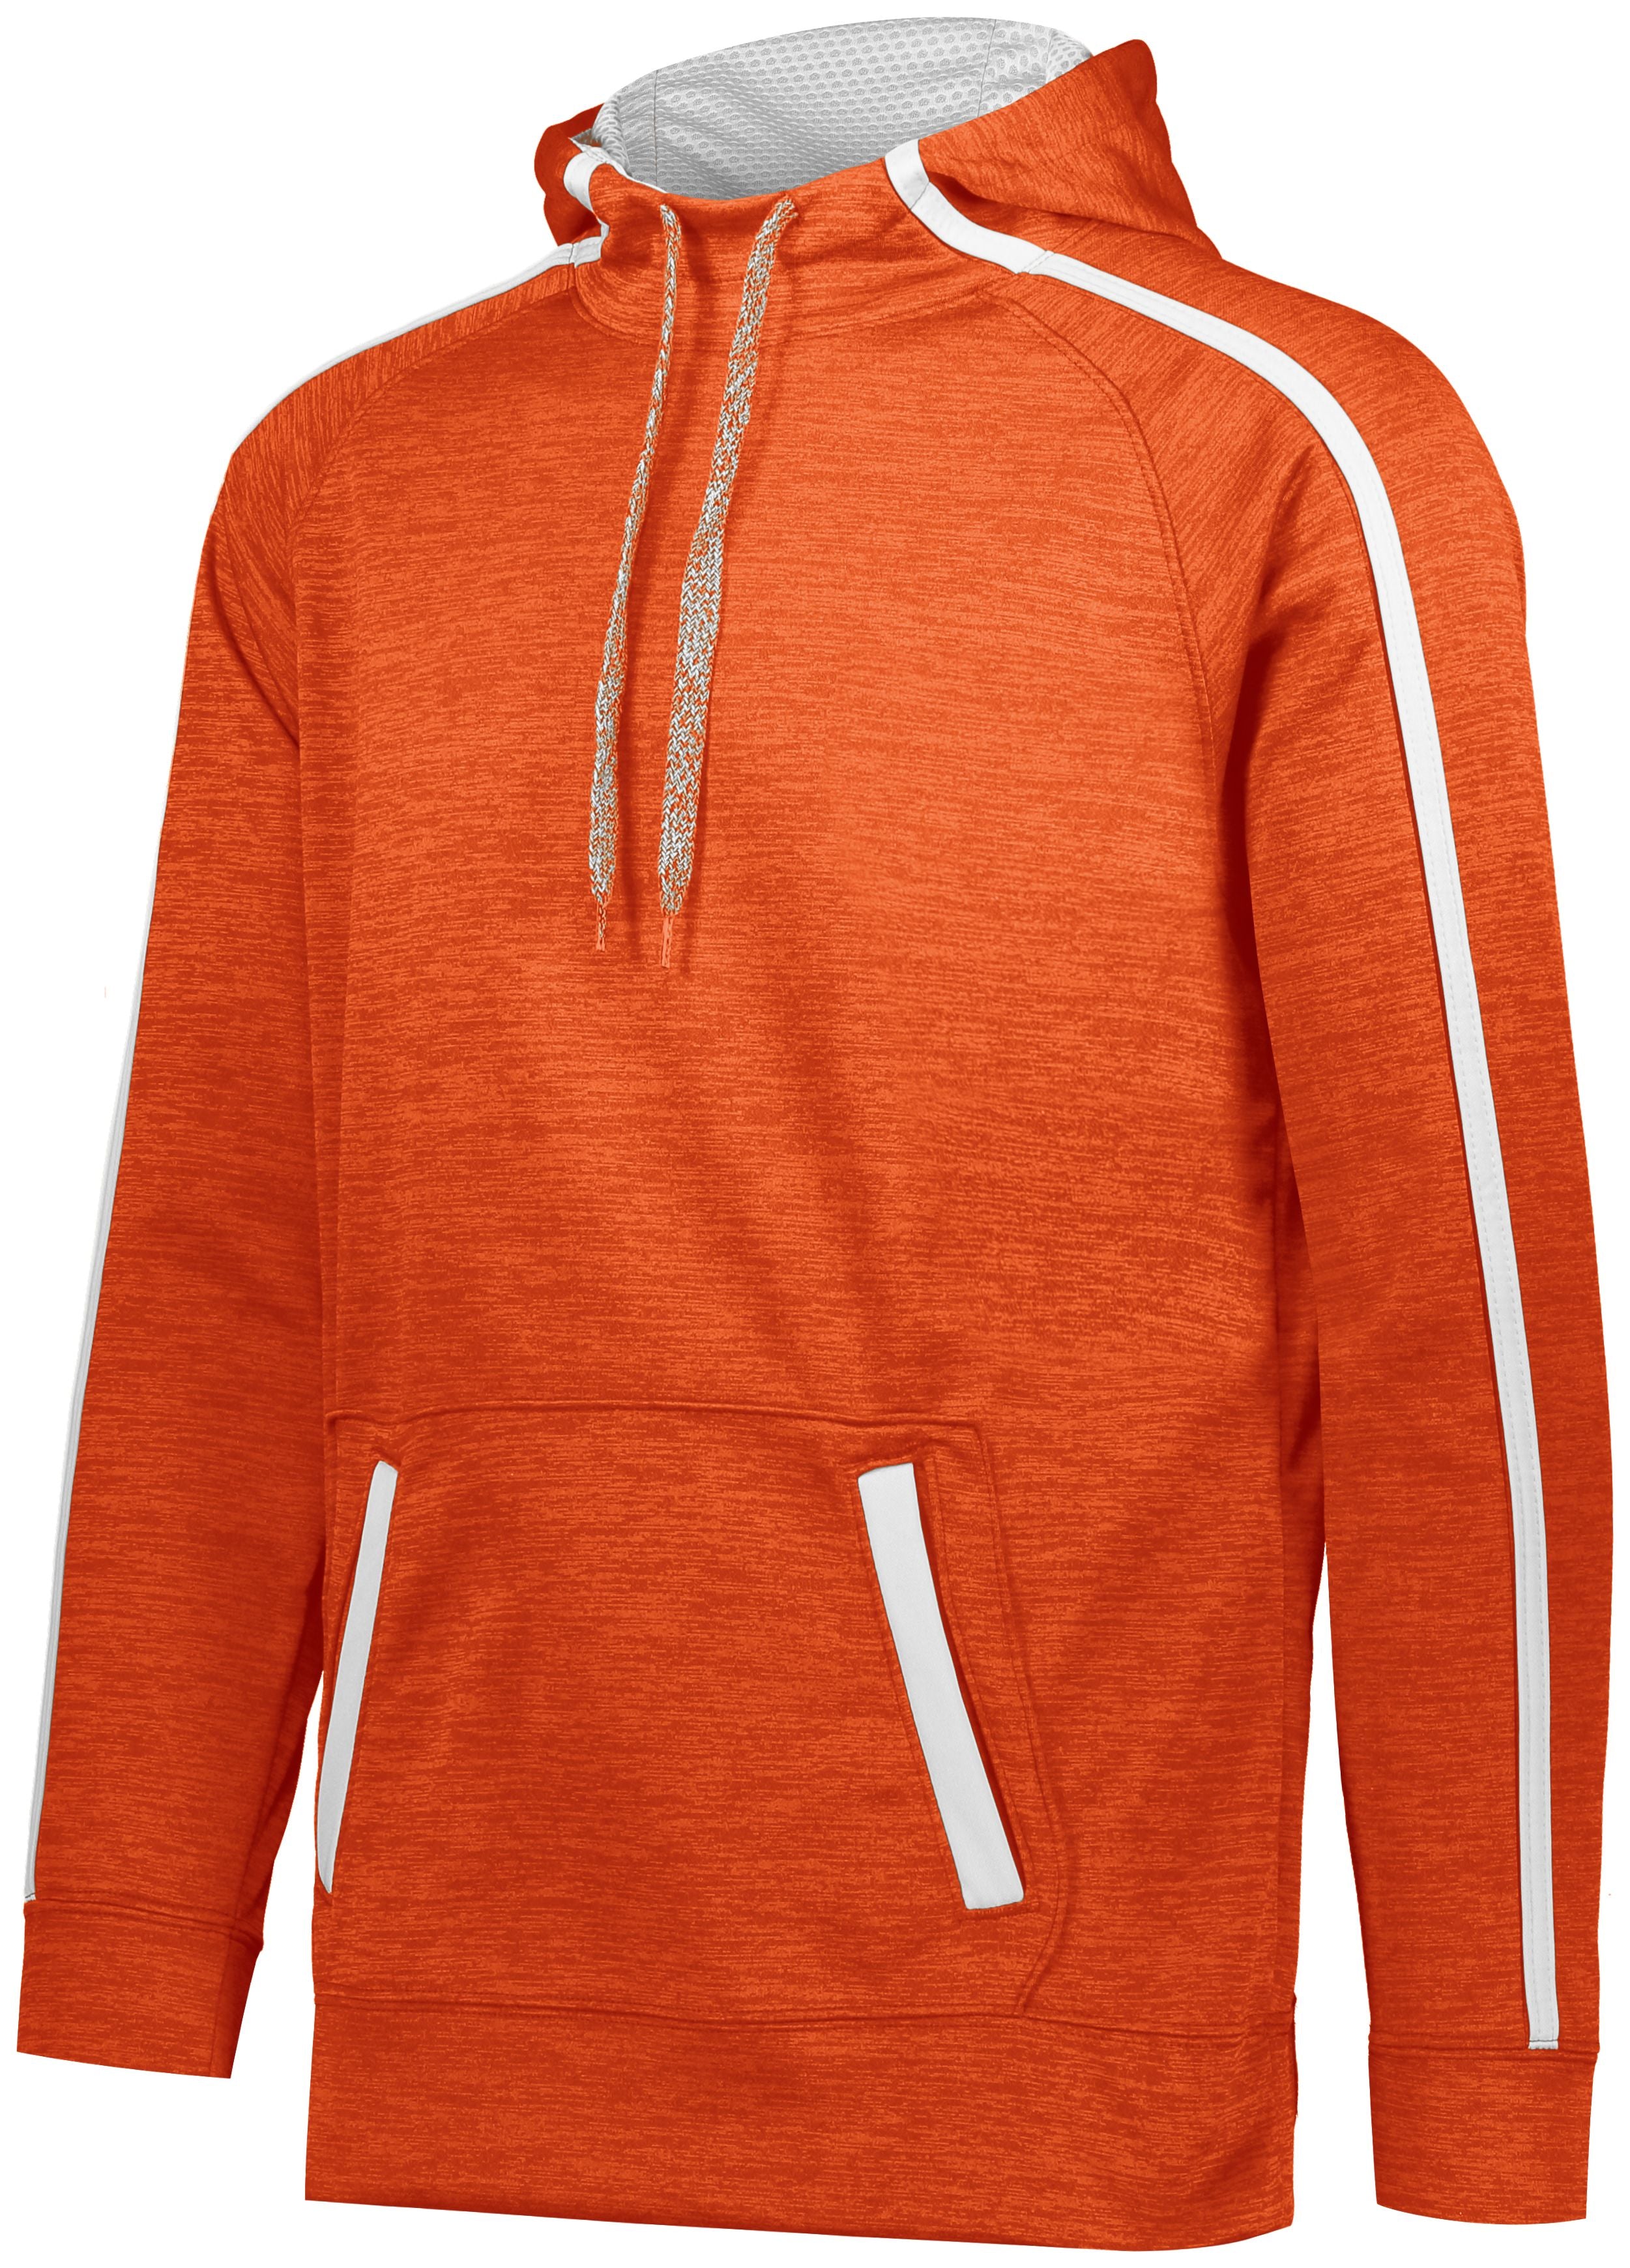 Augusta Sportswear Stoked Tonal Heather Hoodie in Orange/White  -Part of the Adult, Augusta-Products, Shirts, Tonal-Fleece-Collection product lines at KanaleyCreations.com